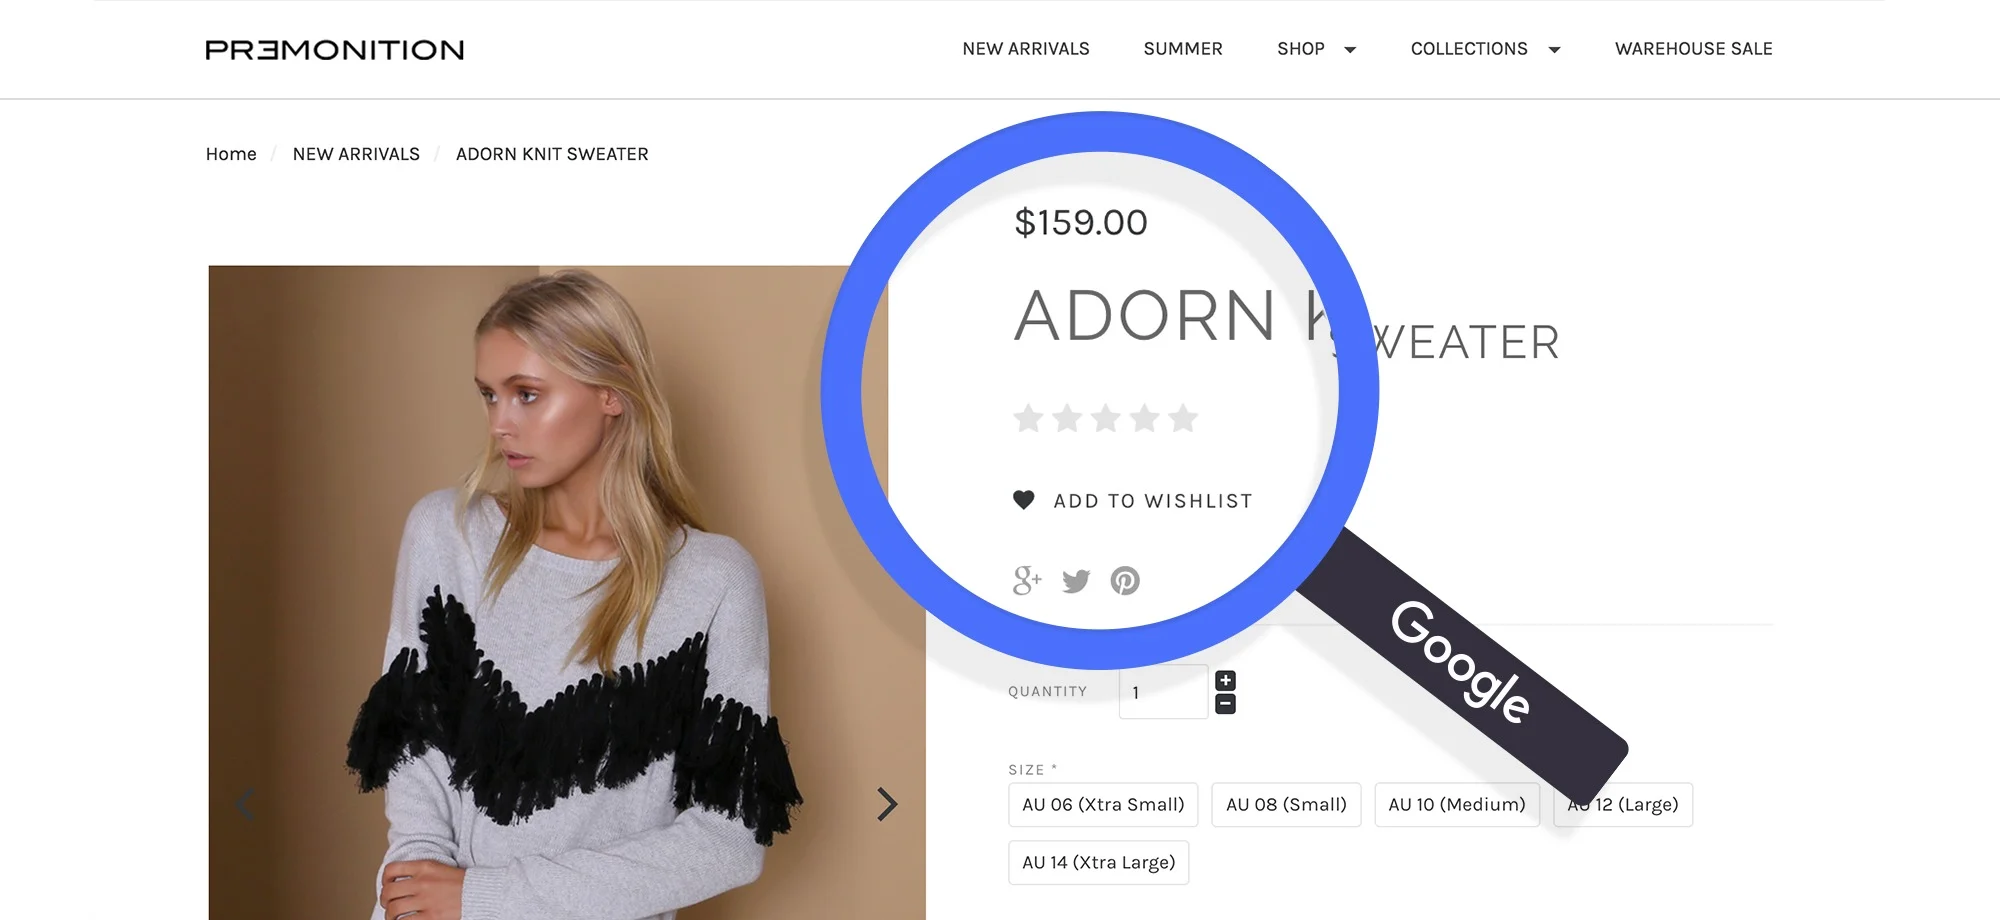 How to Get Started with SEO Golden Rules for Your E-commerce